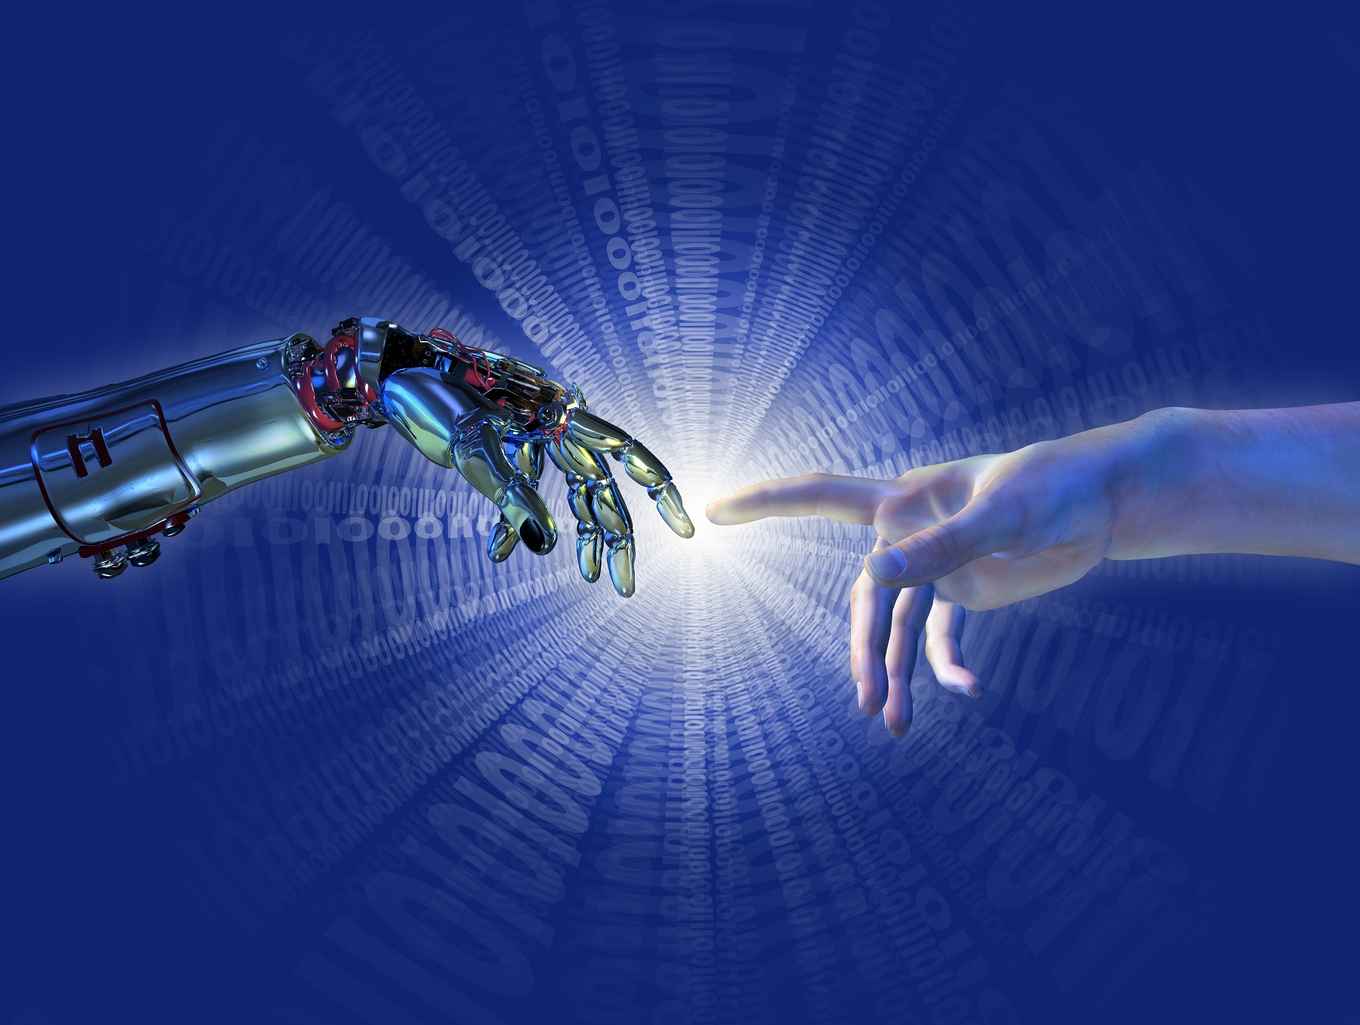 The birth of artificial intelligence